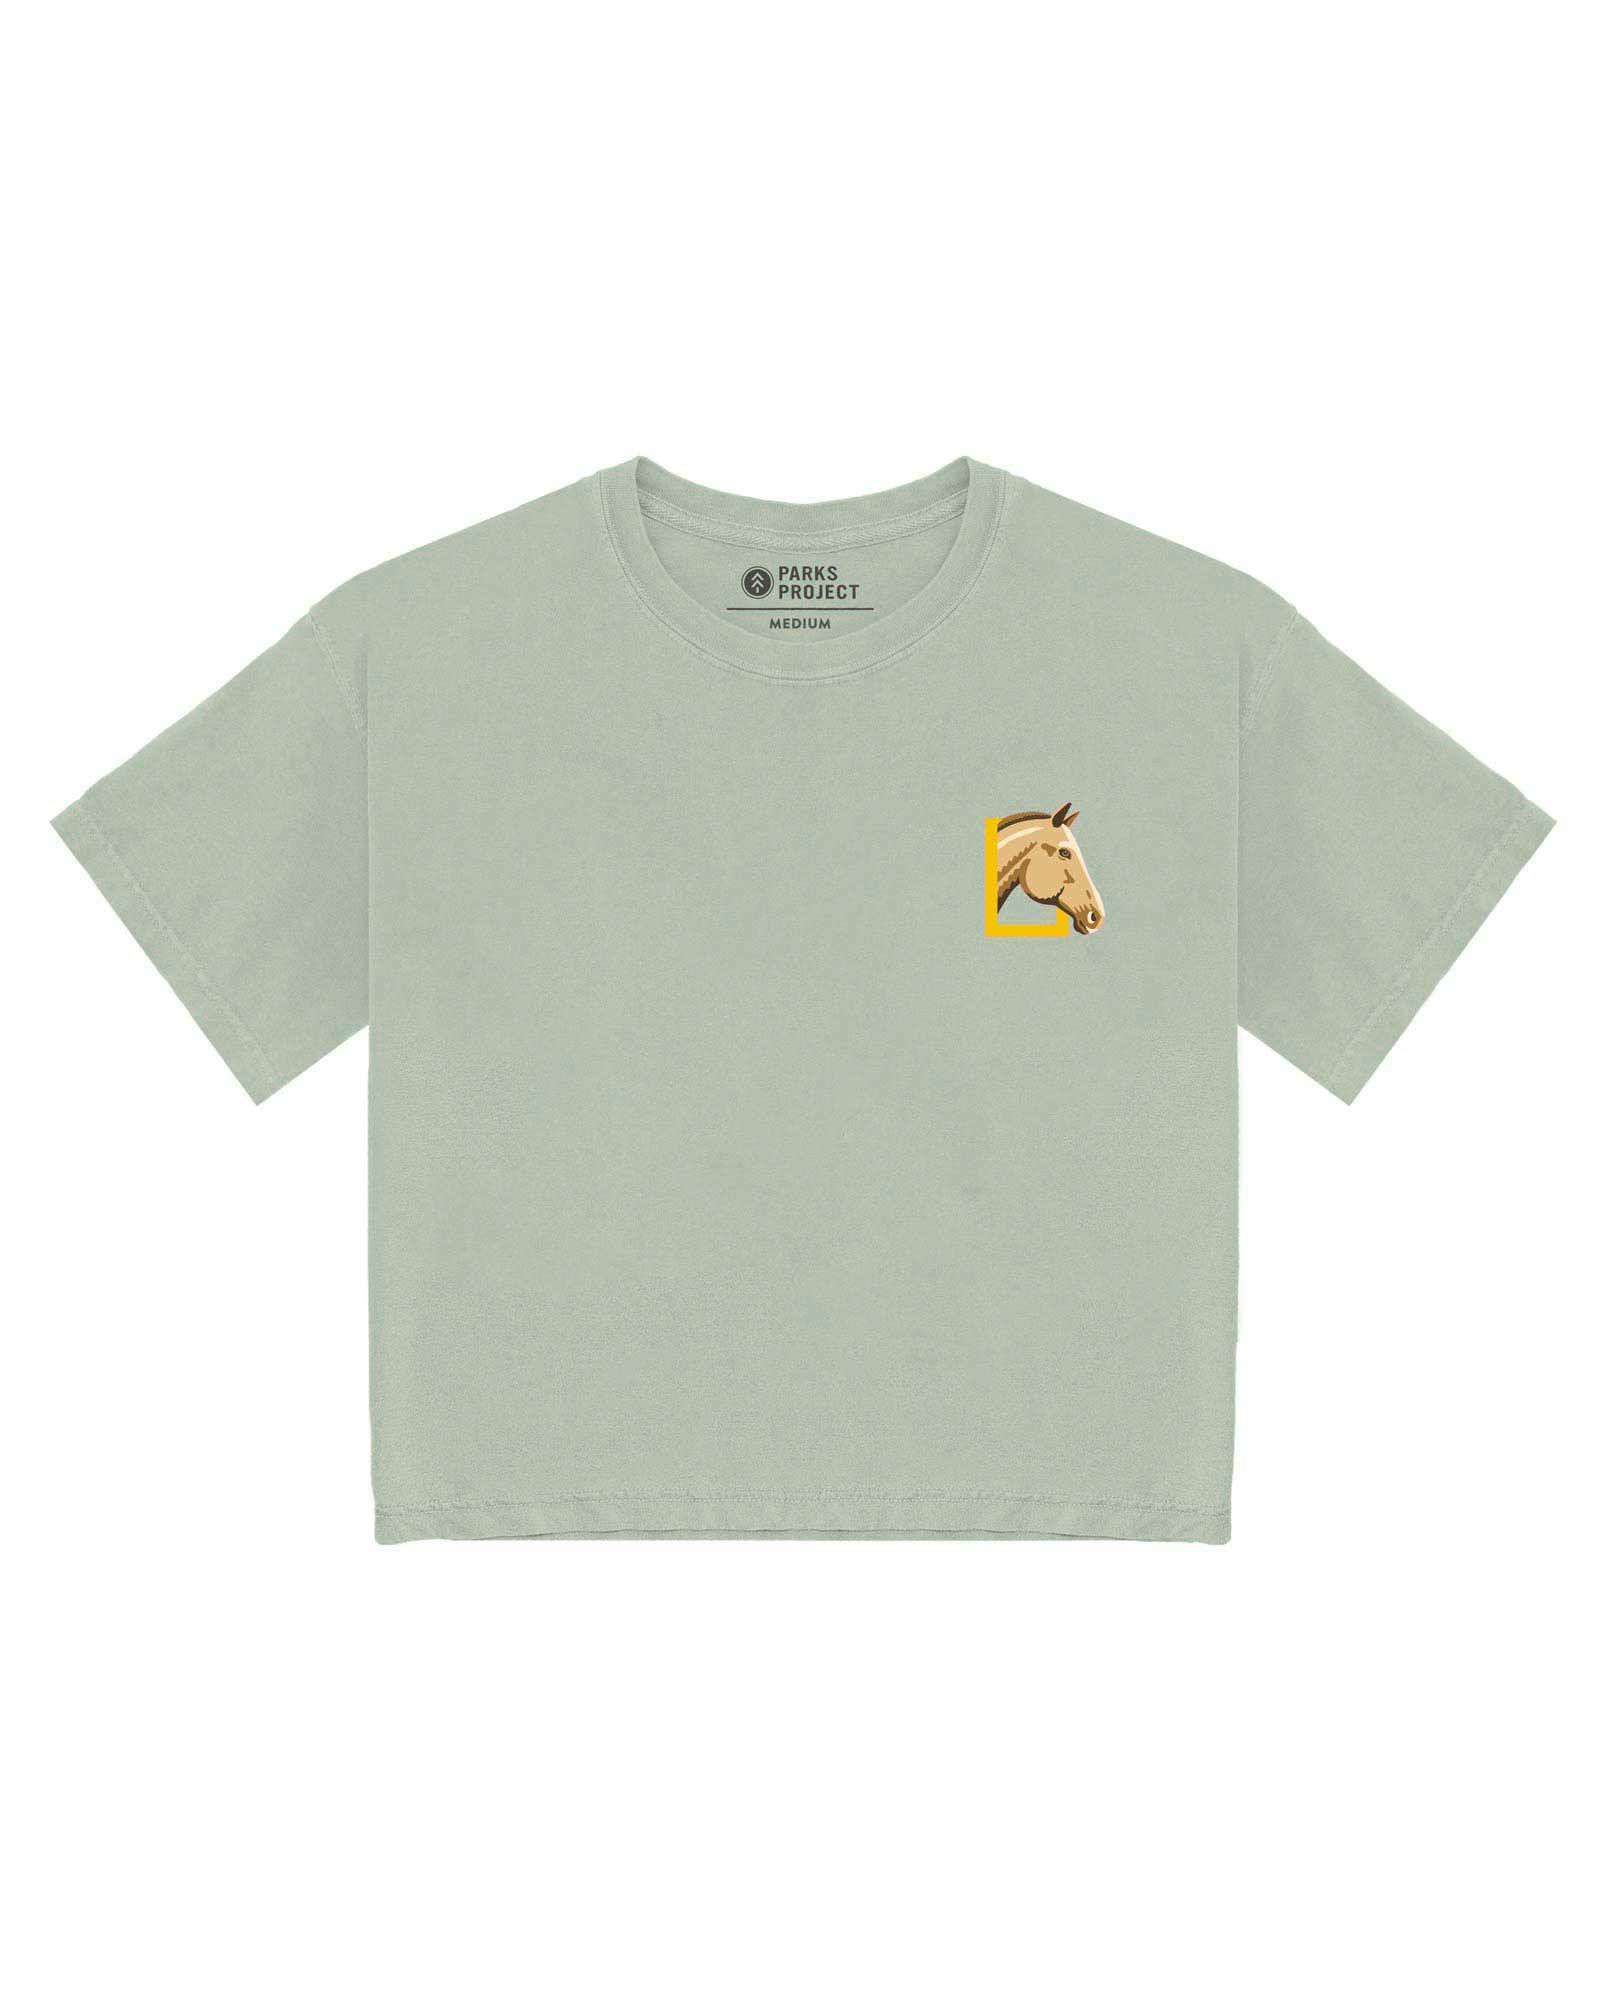 National Geographic x Parks Project Wild Horses Boxy Tee